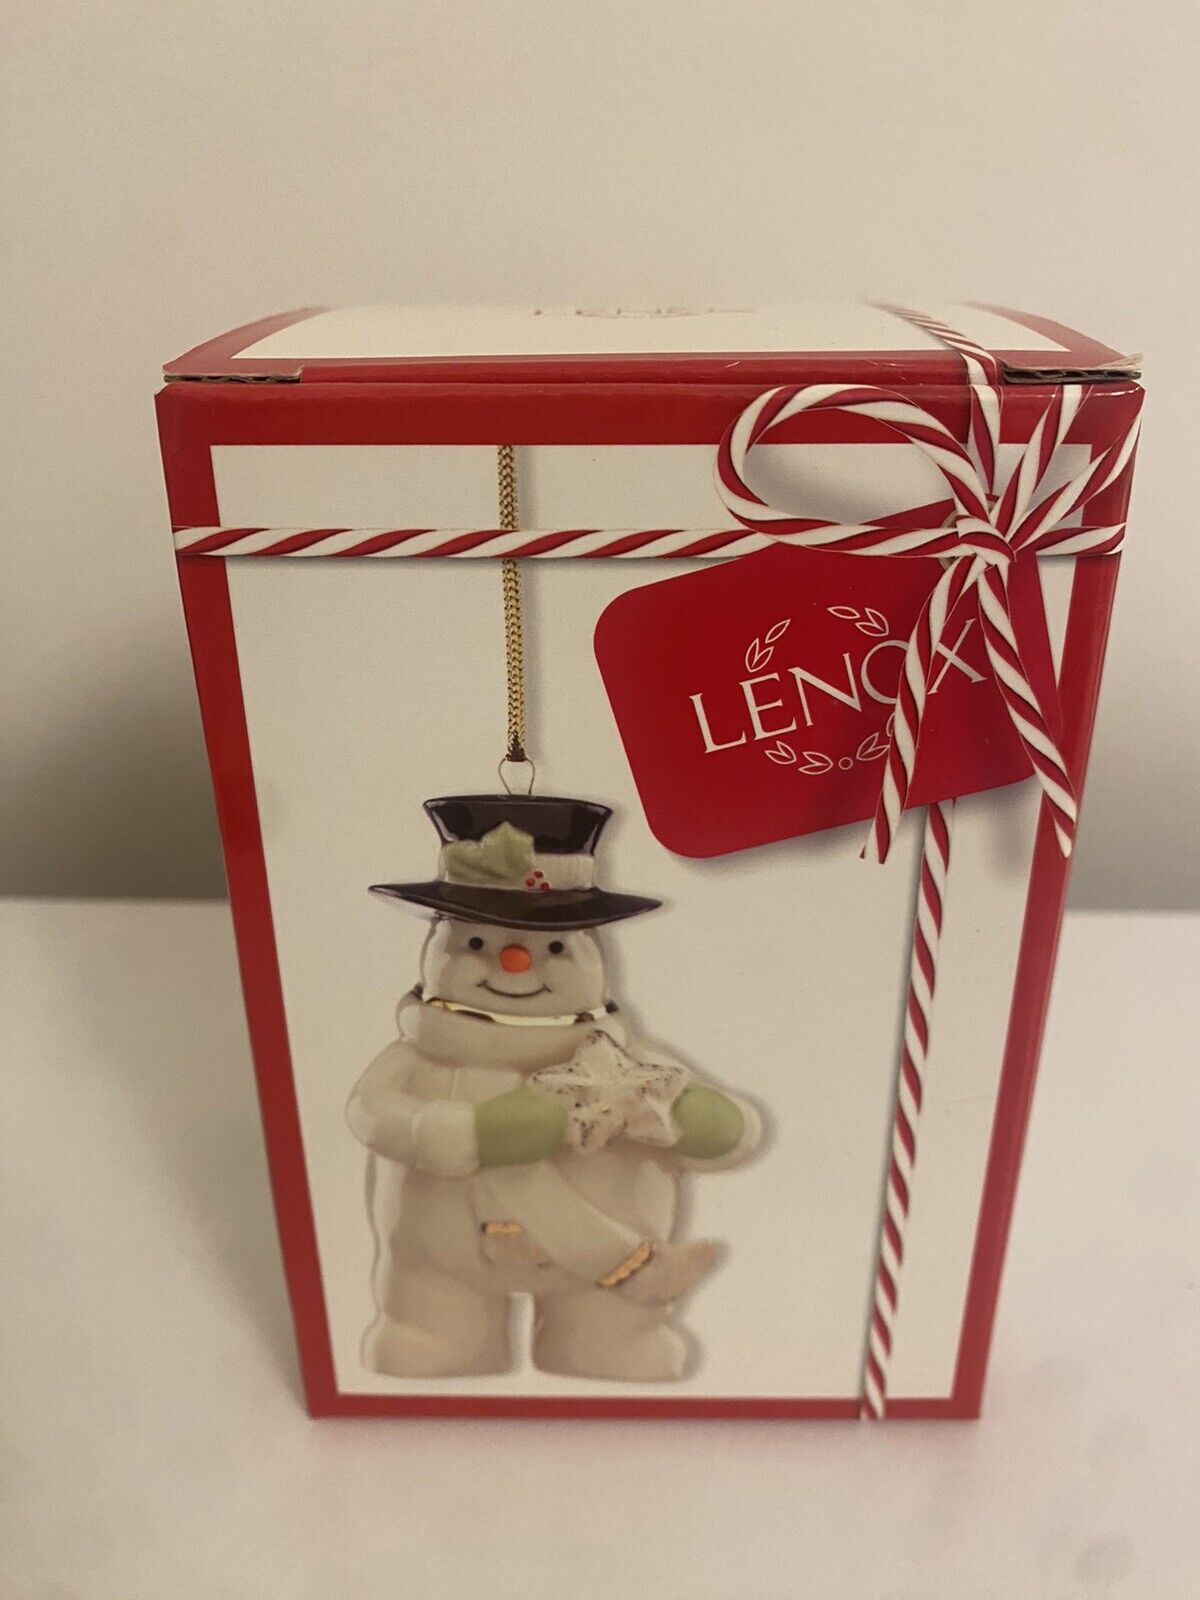 Lenox Holiday Cheer Snowman Christmas Ornament Porcelain/Gold NEW IN BOX 